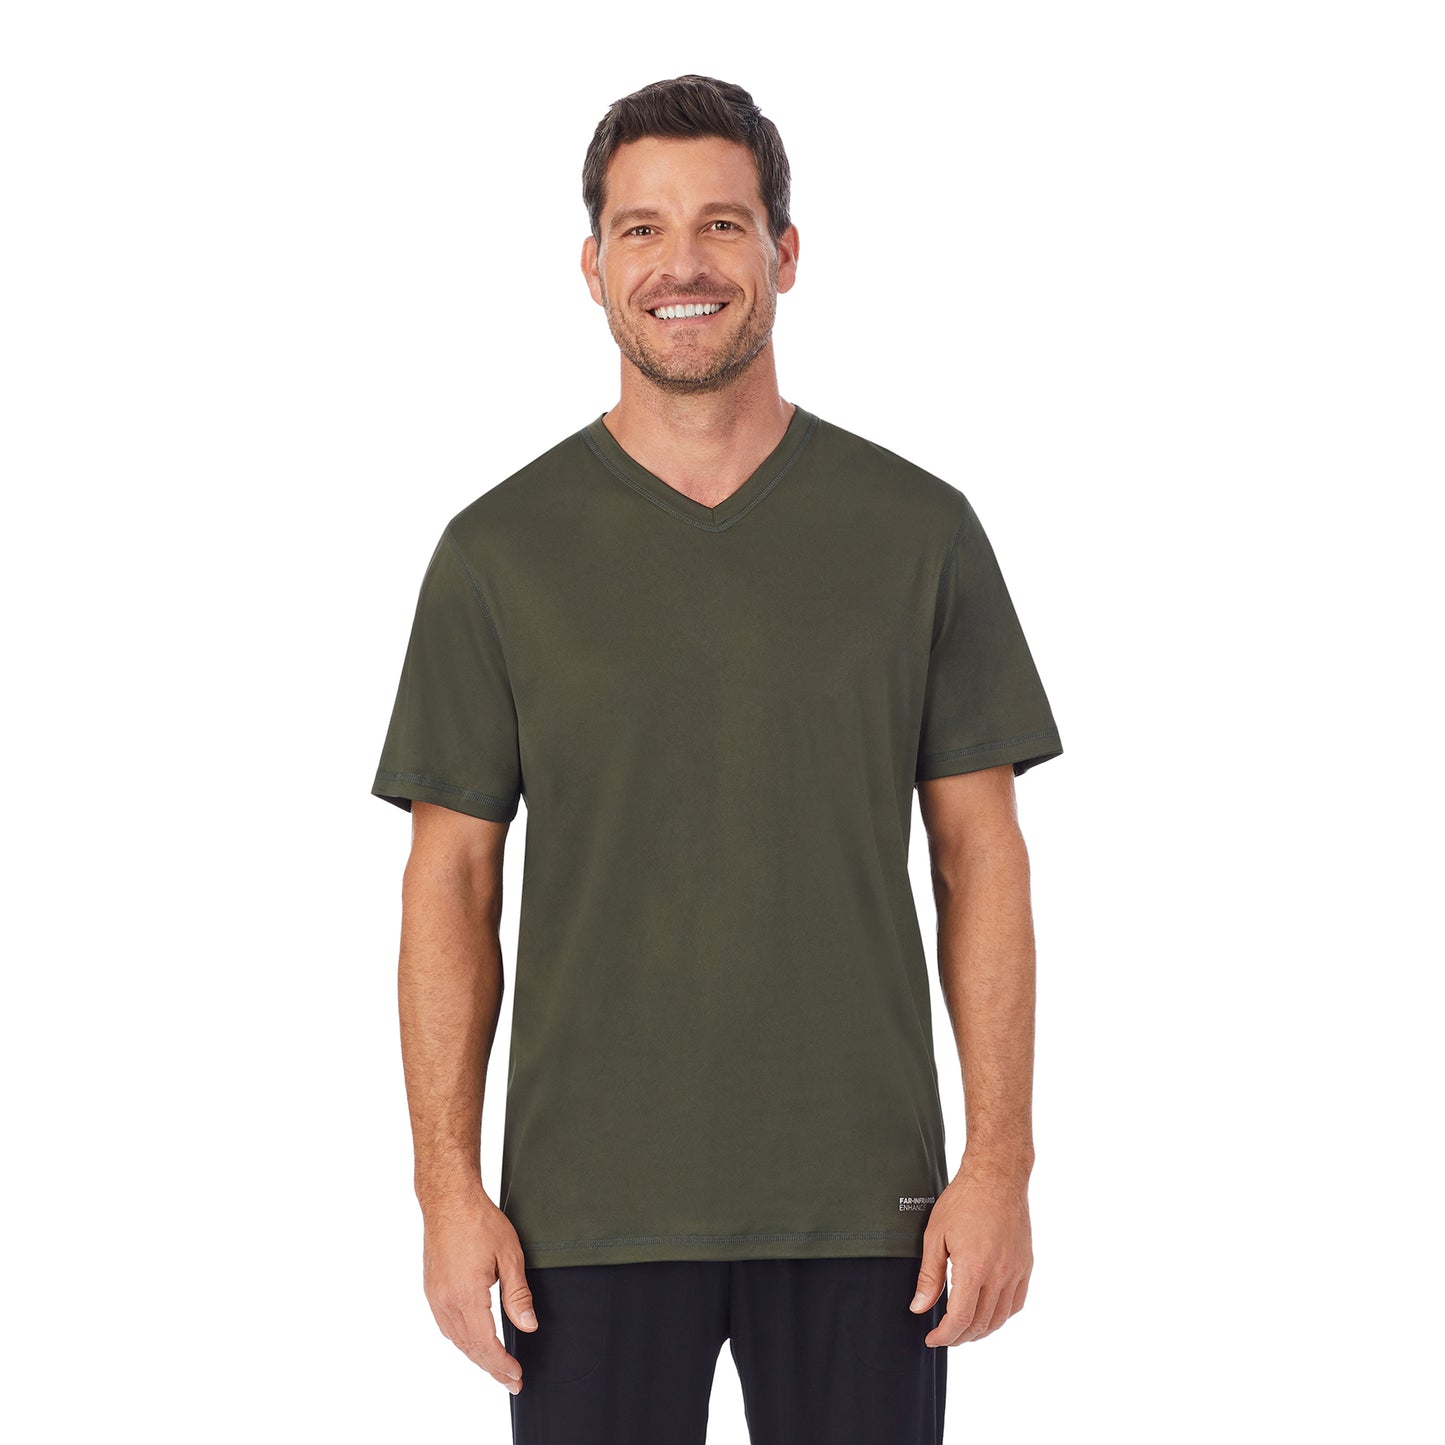 Olive;Model is wearing size M. He is 6'1", Waist 31", Inseam 33"@ A lady wearingMens Far-Infrared Enhance Sleep Short Sleeve V-Neck Top with Olive print